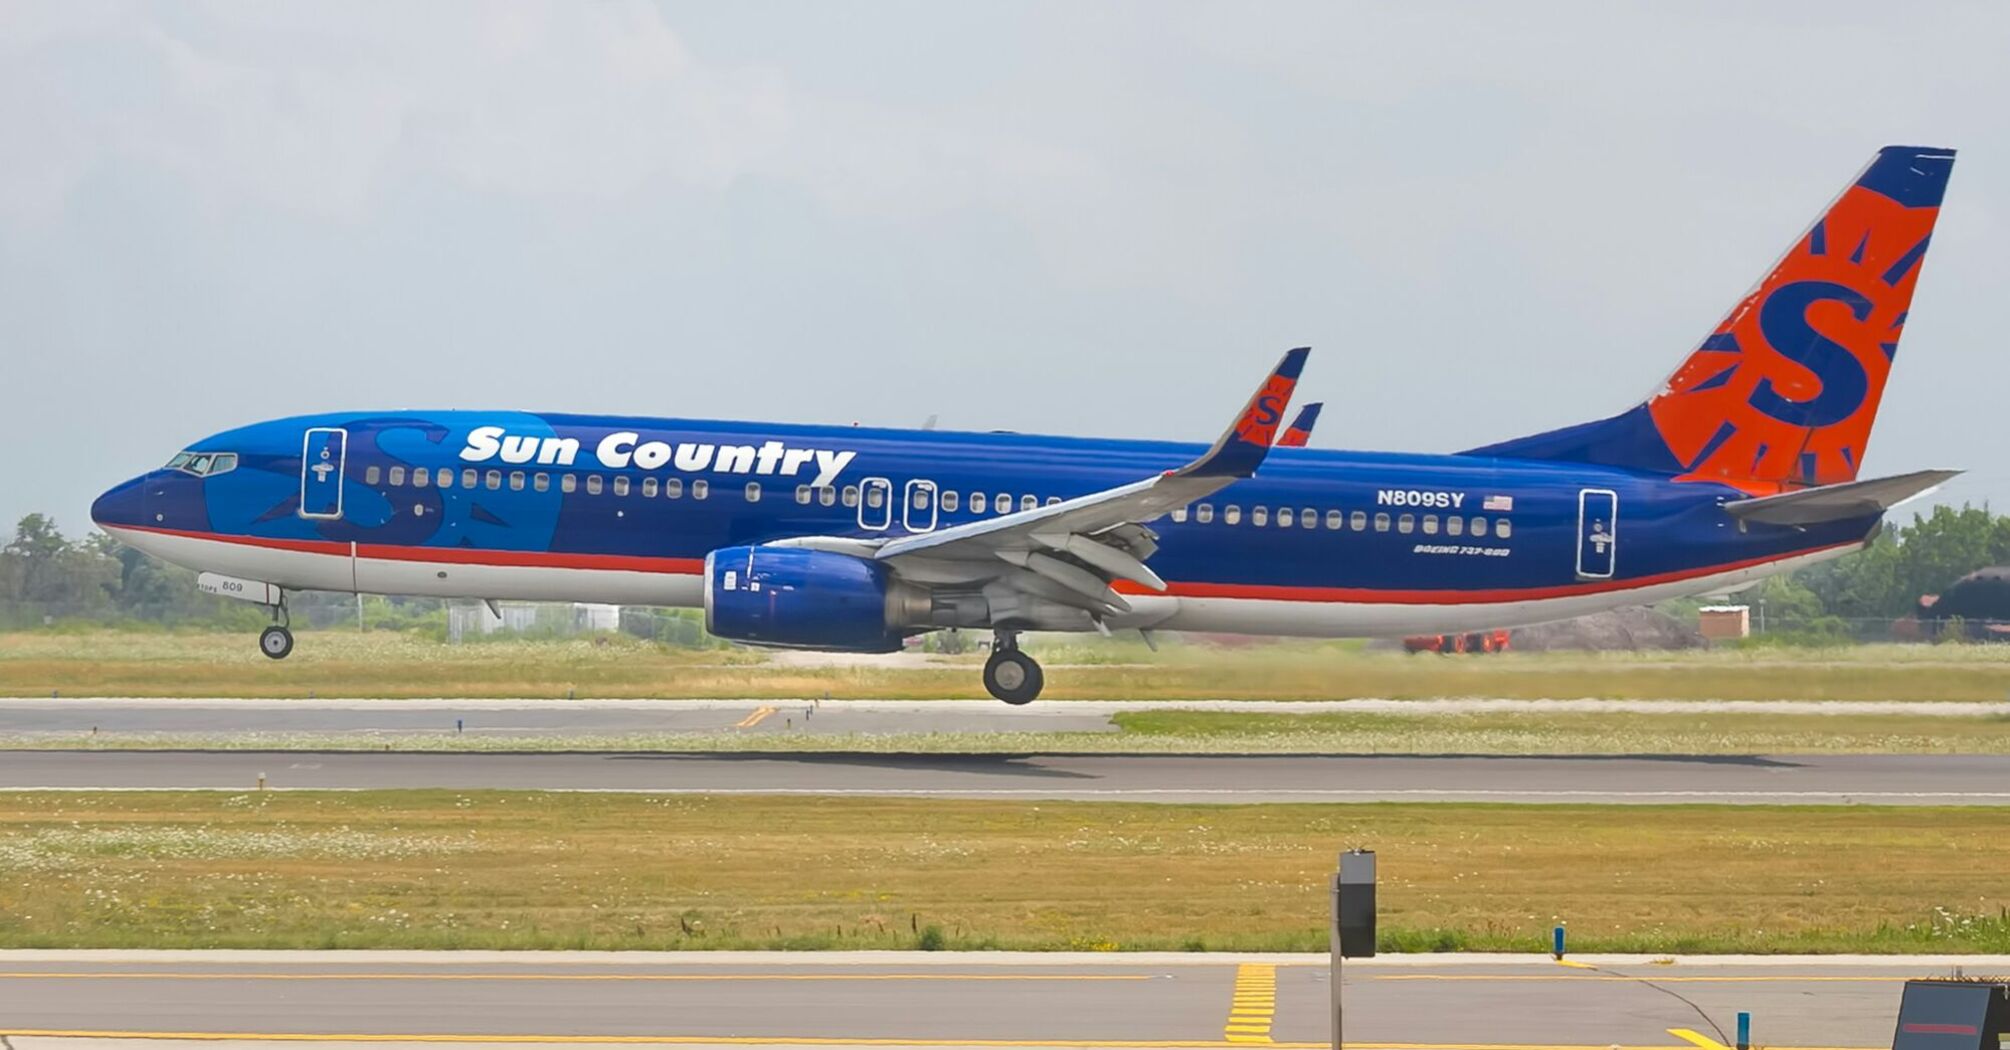 A Sun Country Airlines airplane landing on a runway